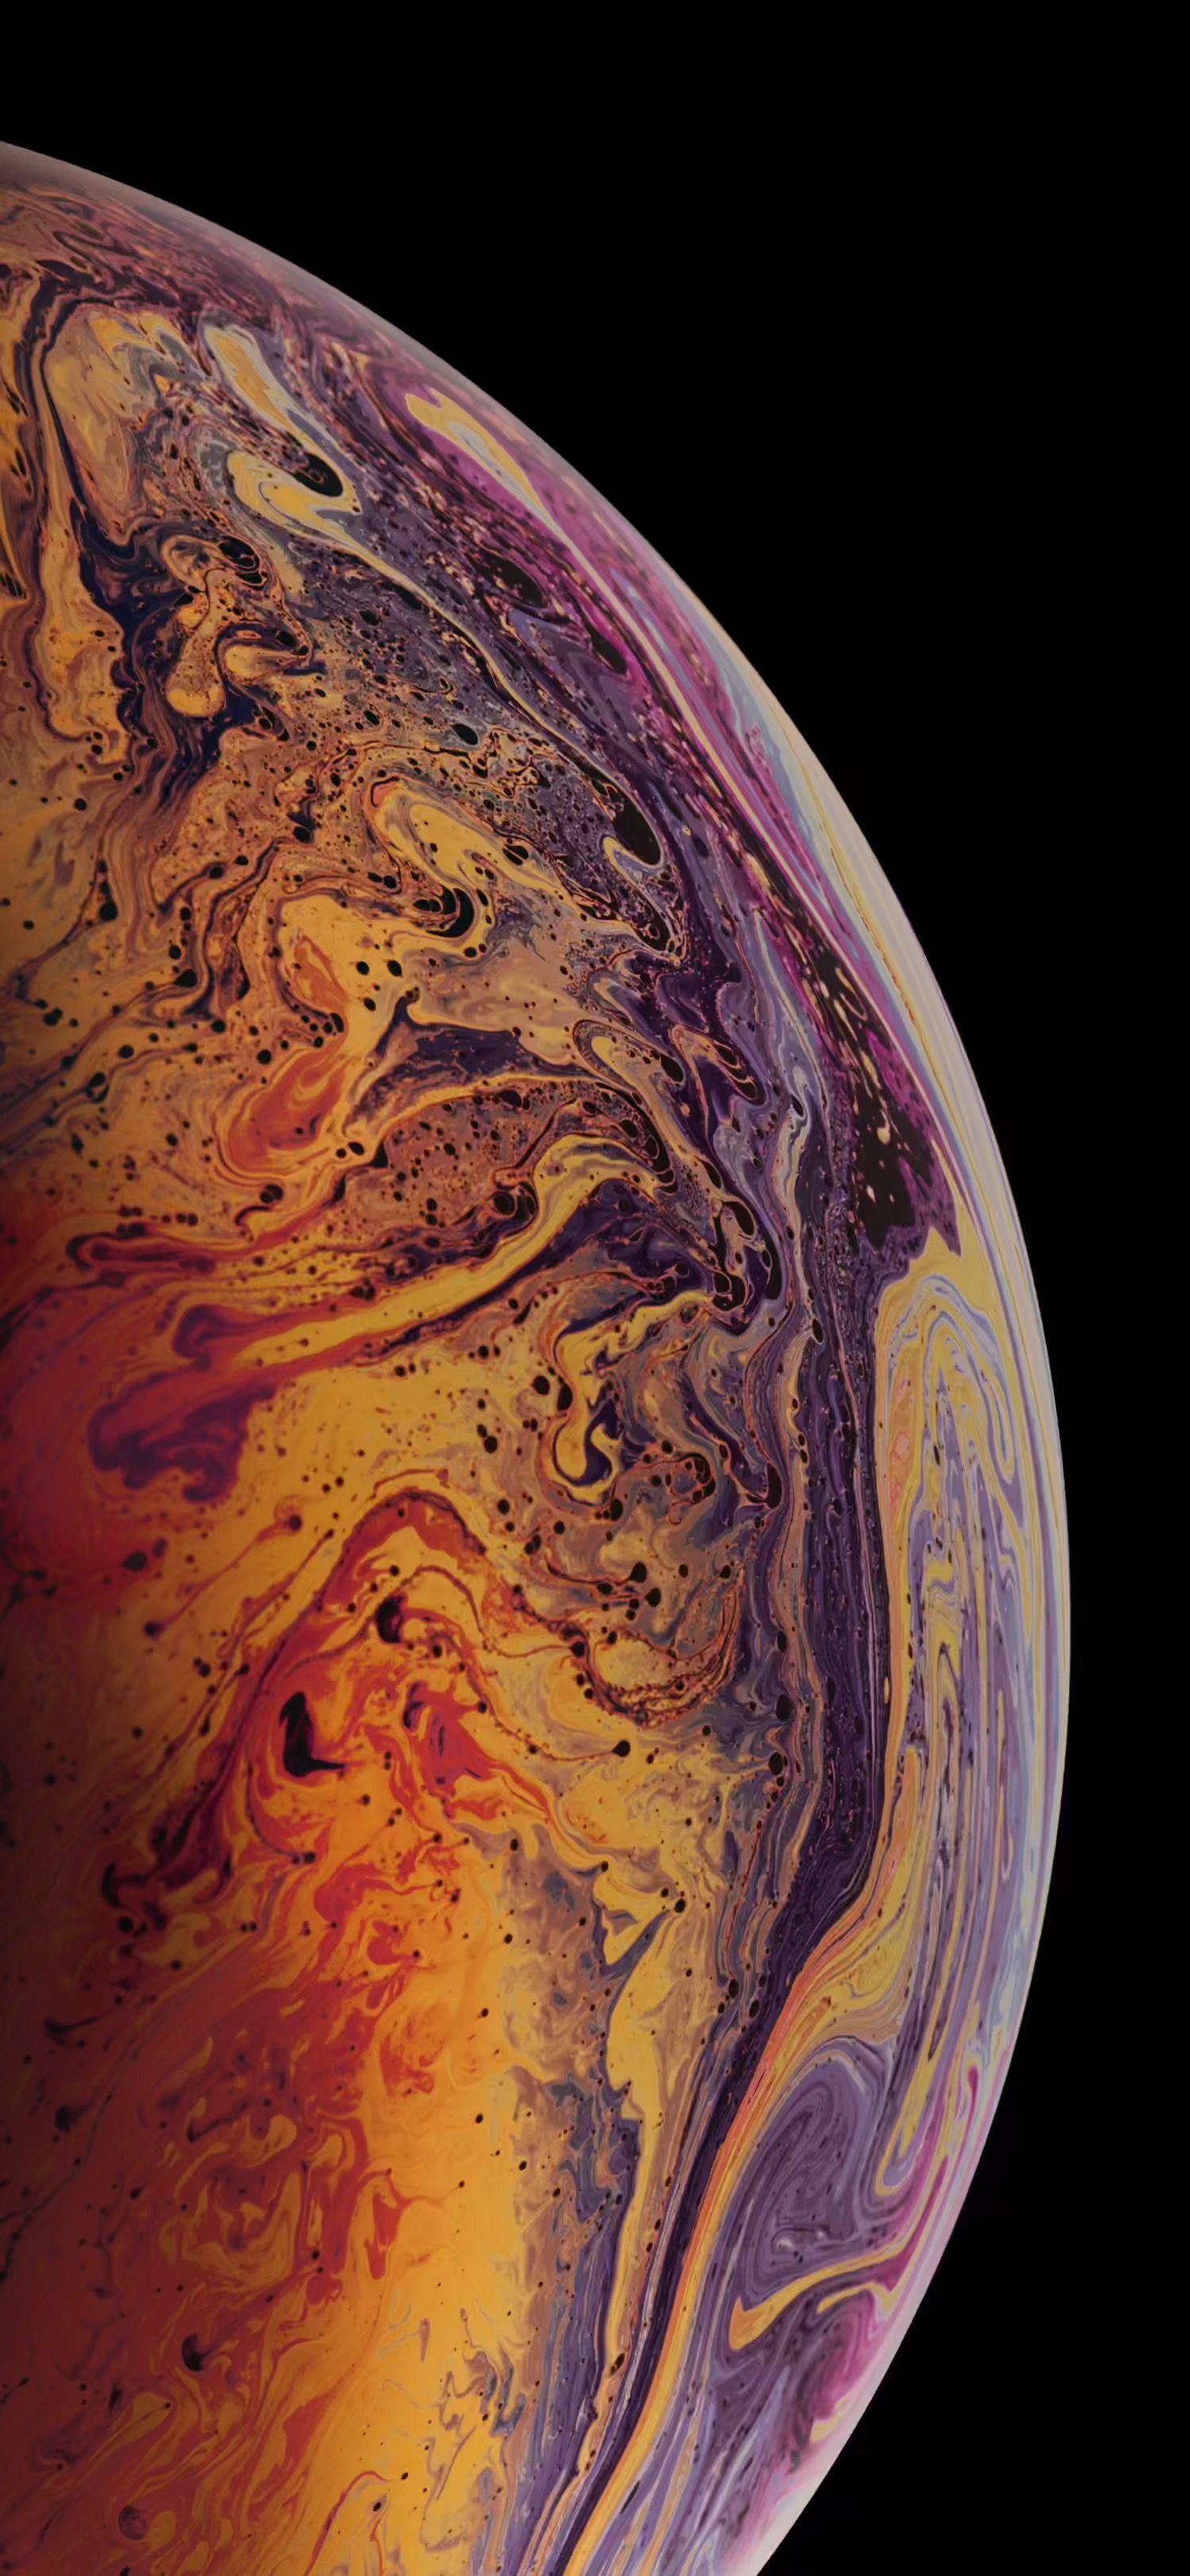 Download The New Iphone Xs And Iphone Xs Max Wallpapers - Iphone Xs Max Gold - HD Wallpaper 